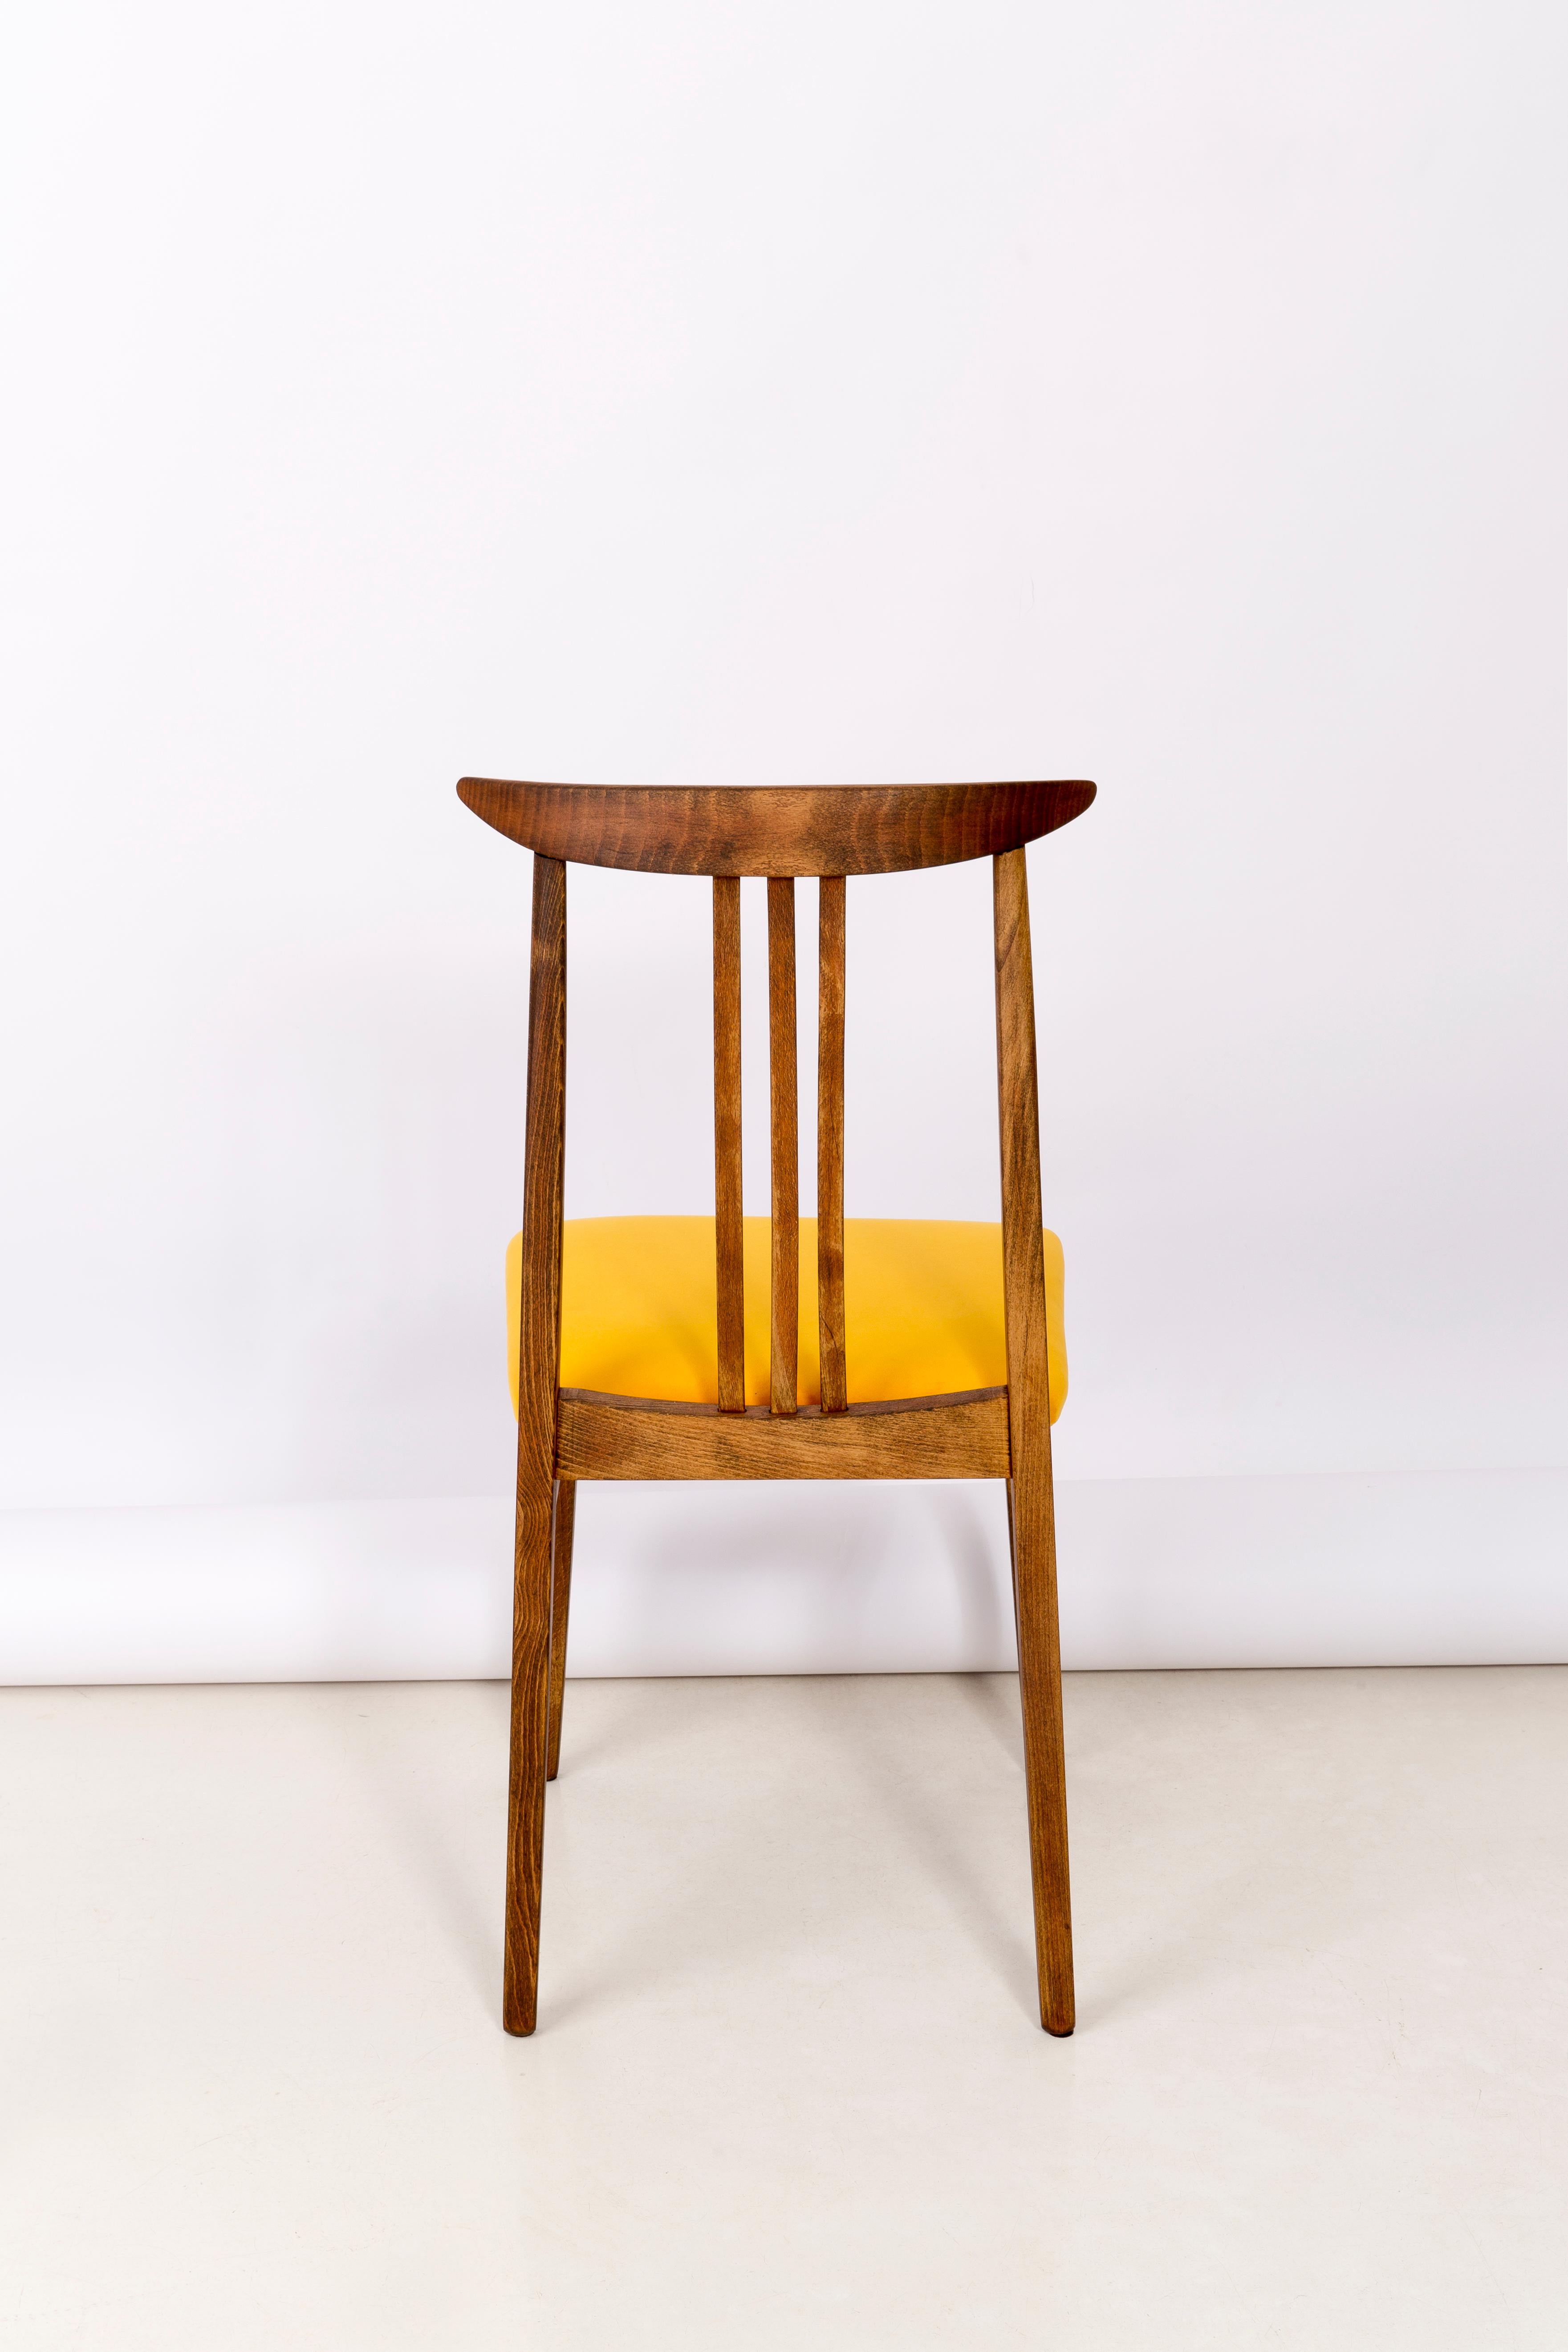 Set of Ten Yellow Chairs, by Zielinski, Europe, 1960s For Sale 4